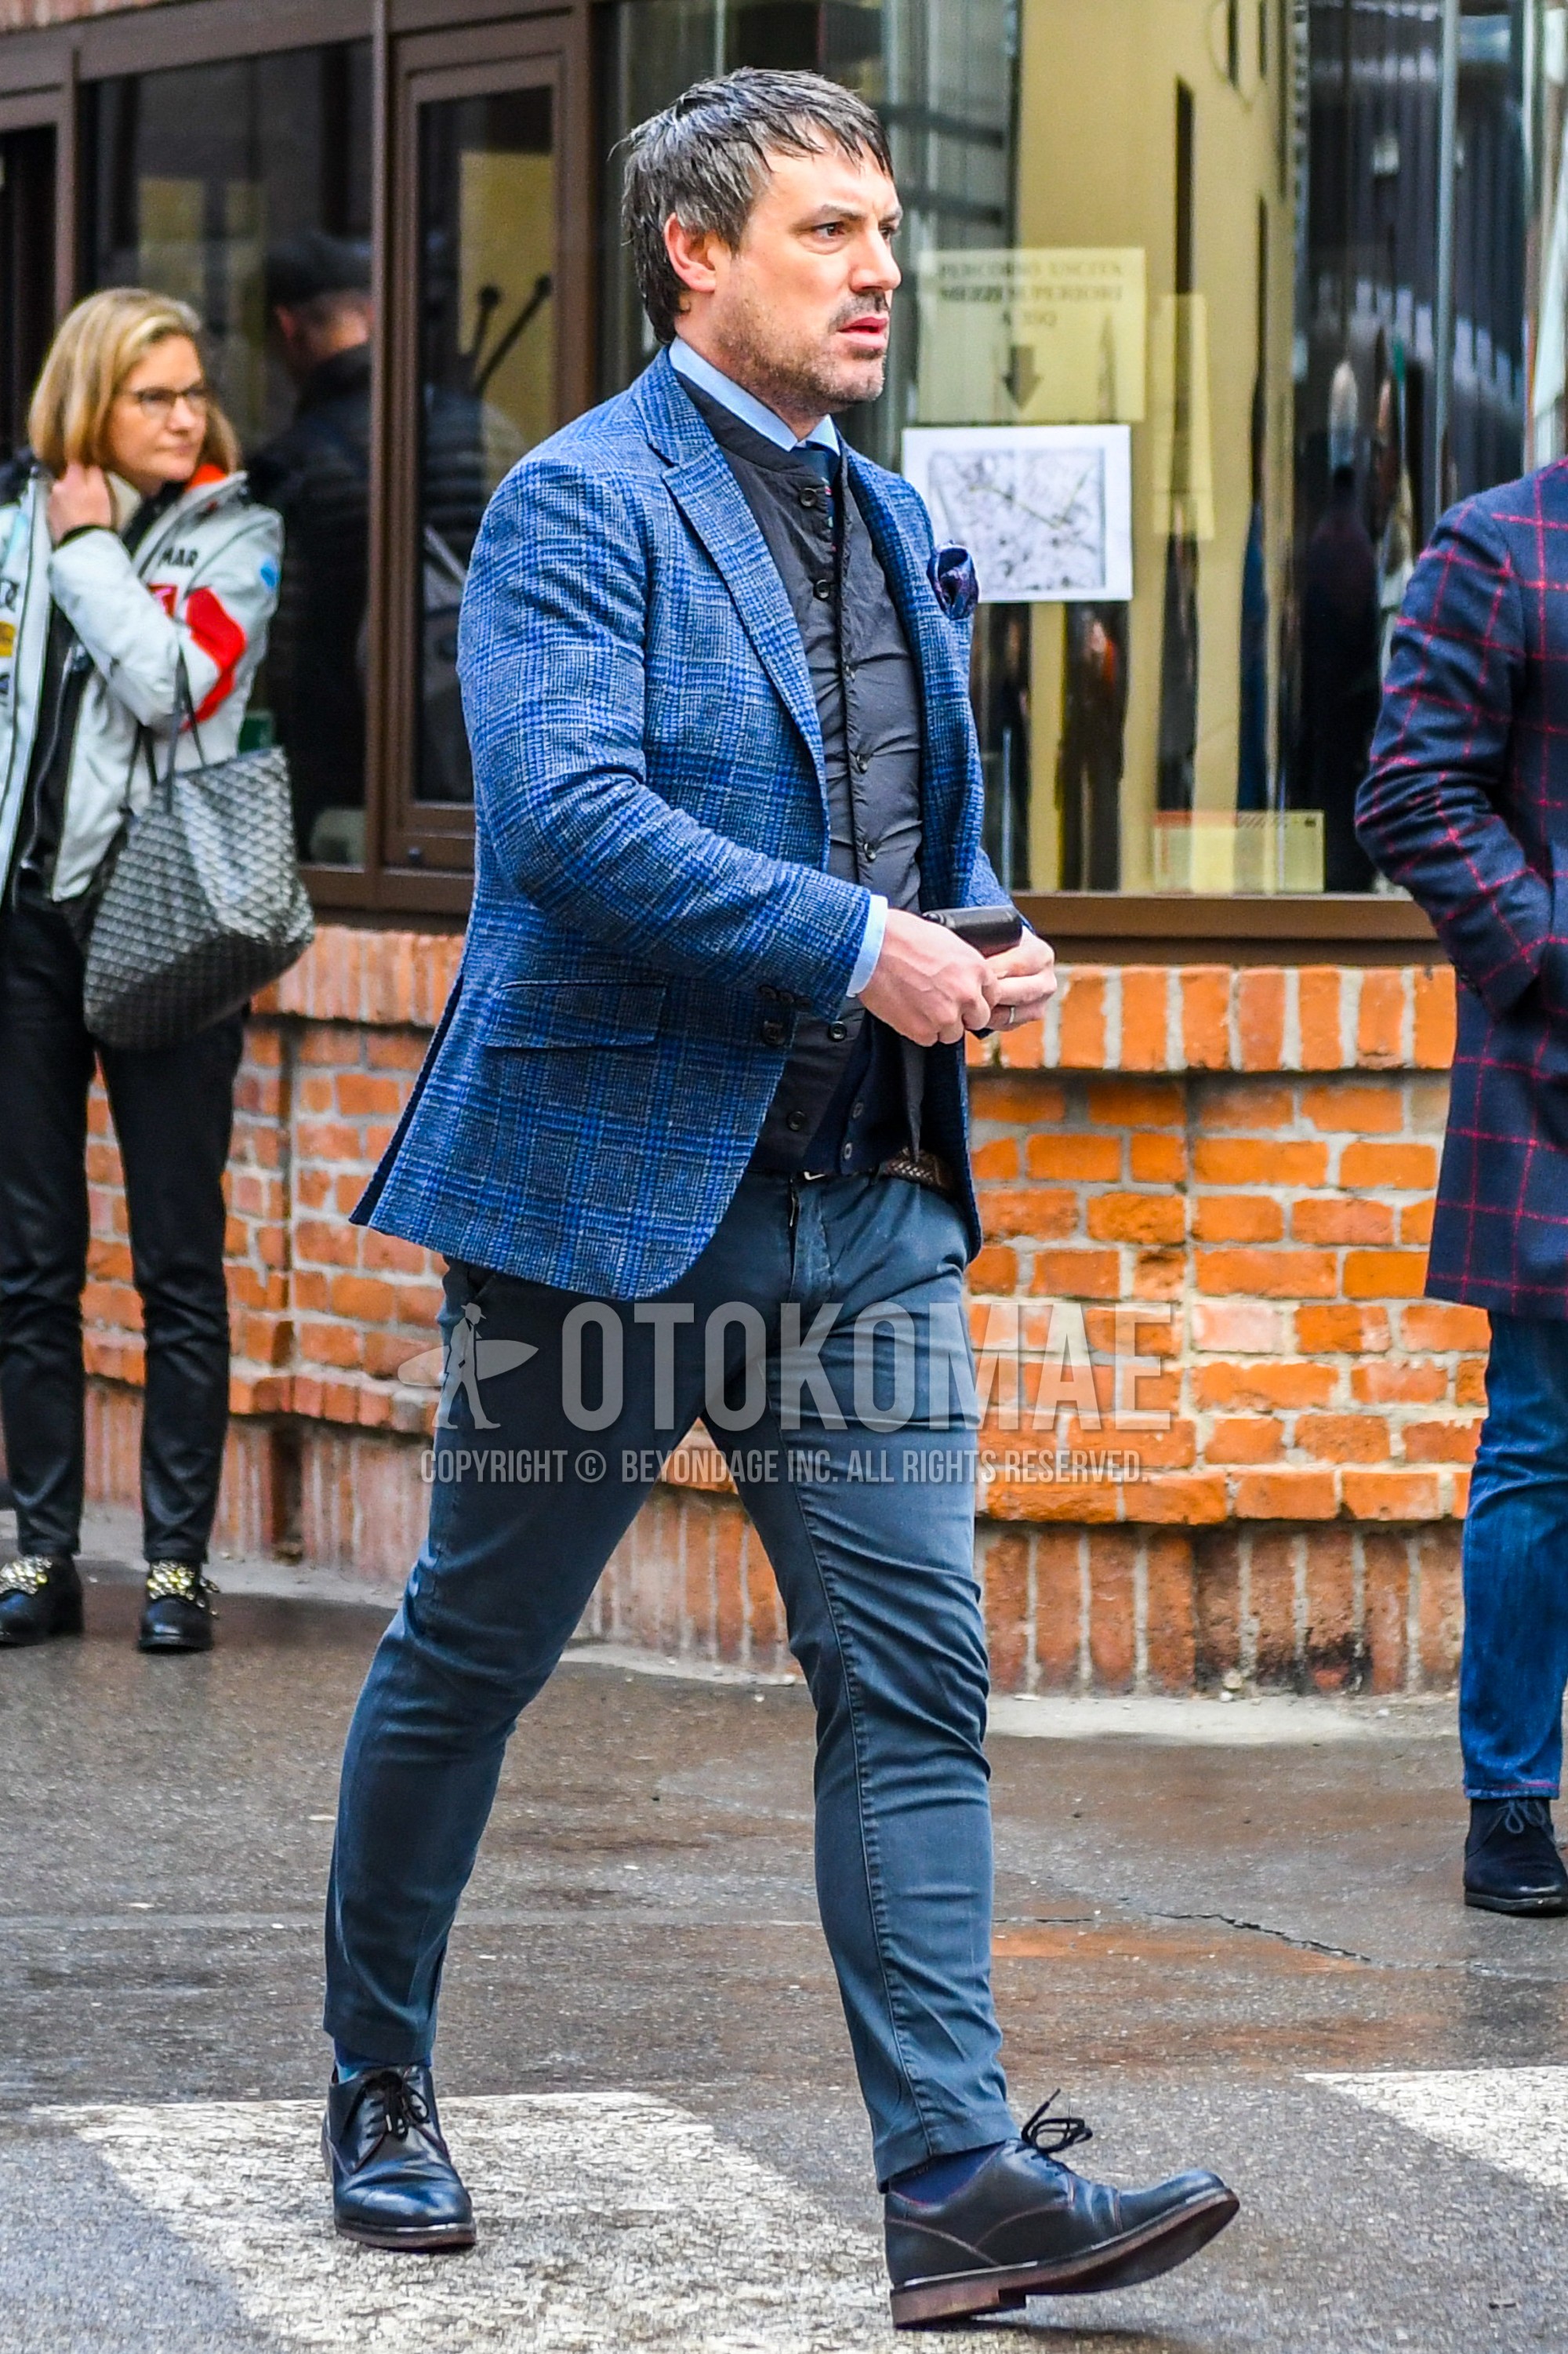 Men's winter outfit with blue check tailored jacket, black plain inner down, dark gray plain chinos, blue plain socks, blue plain toe leather shoes.